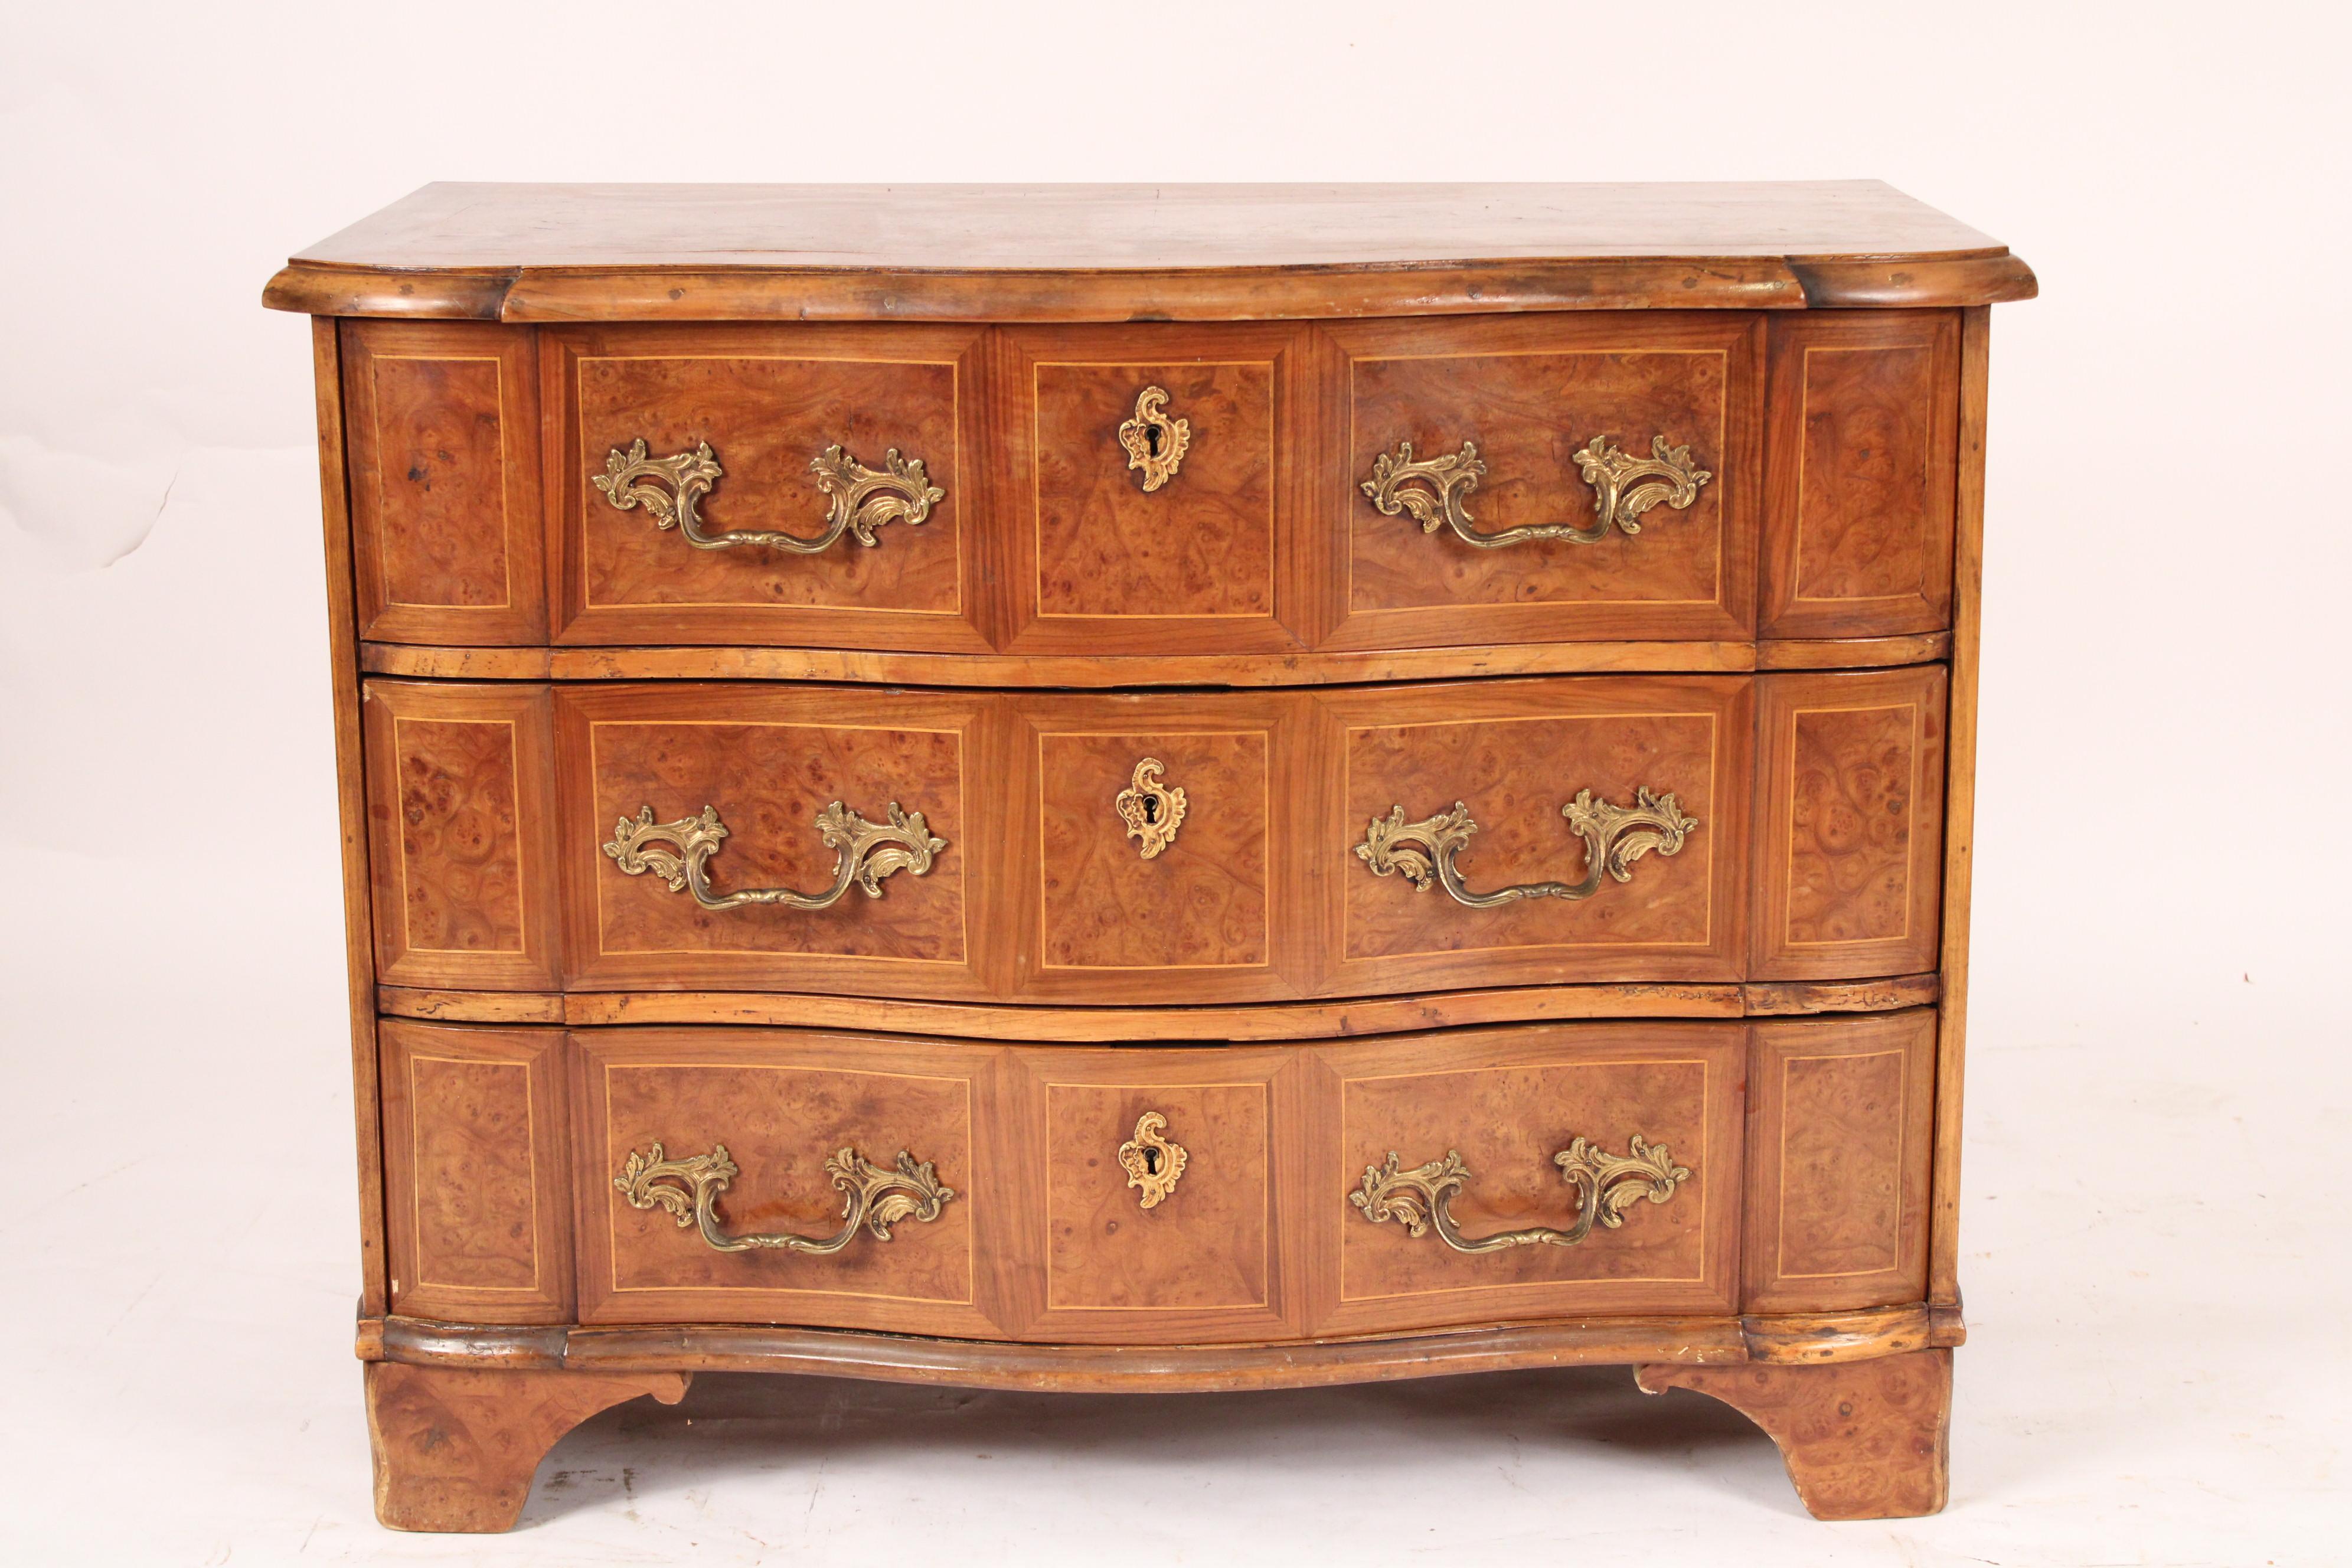 Continental burl elm 3 drawer chest of drawers, 19th century. With a serpentine shaped over hanging top with 3 serpentine shaped drawers with brass pulls and escutcheons, resting on bracket feet. 